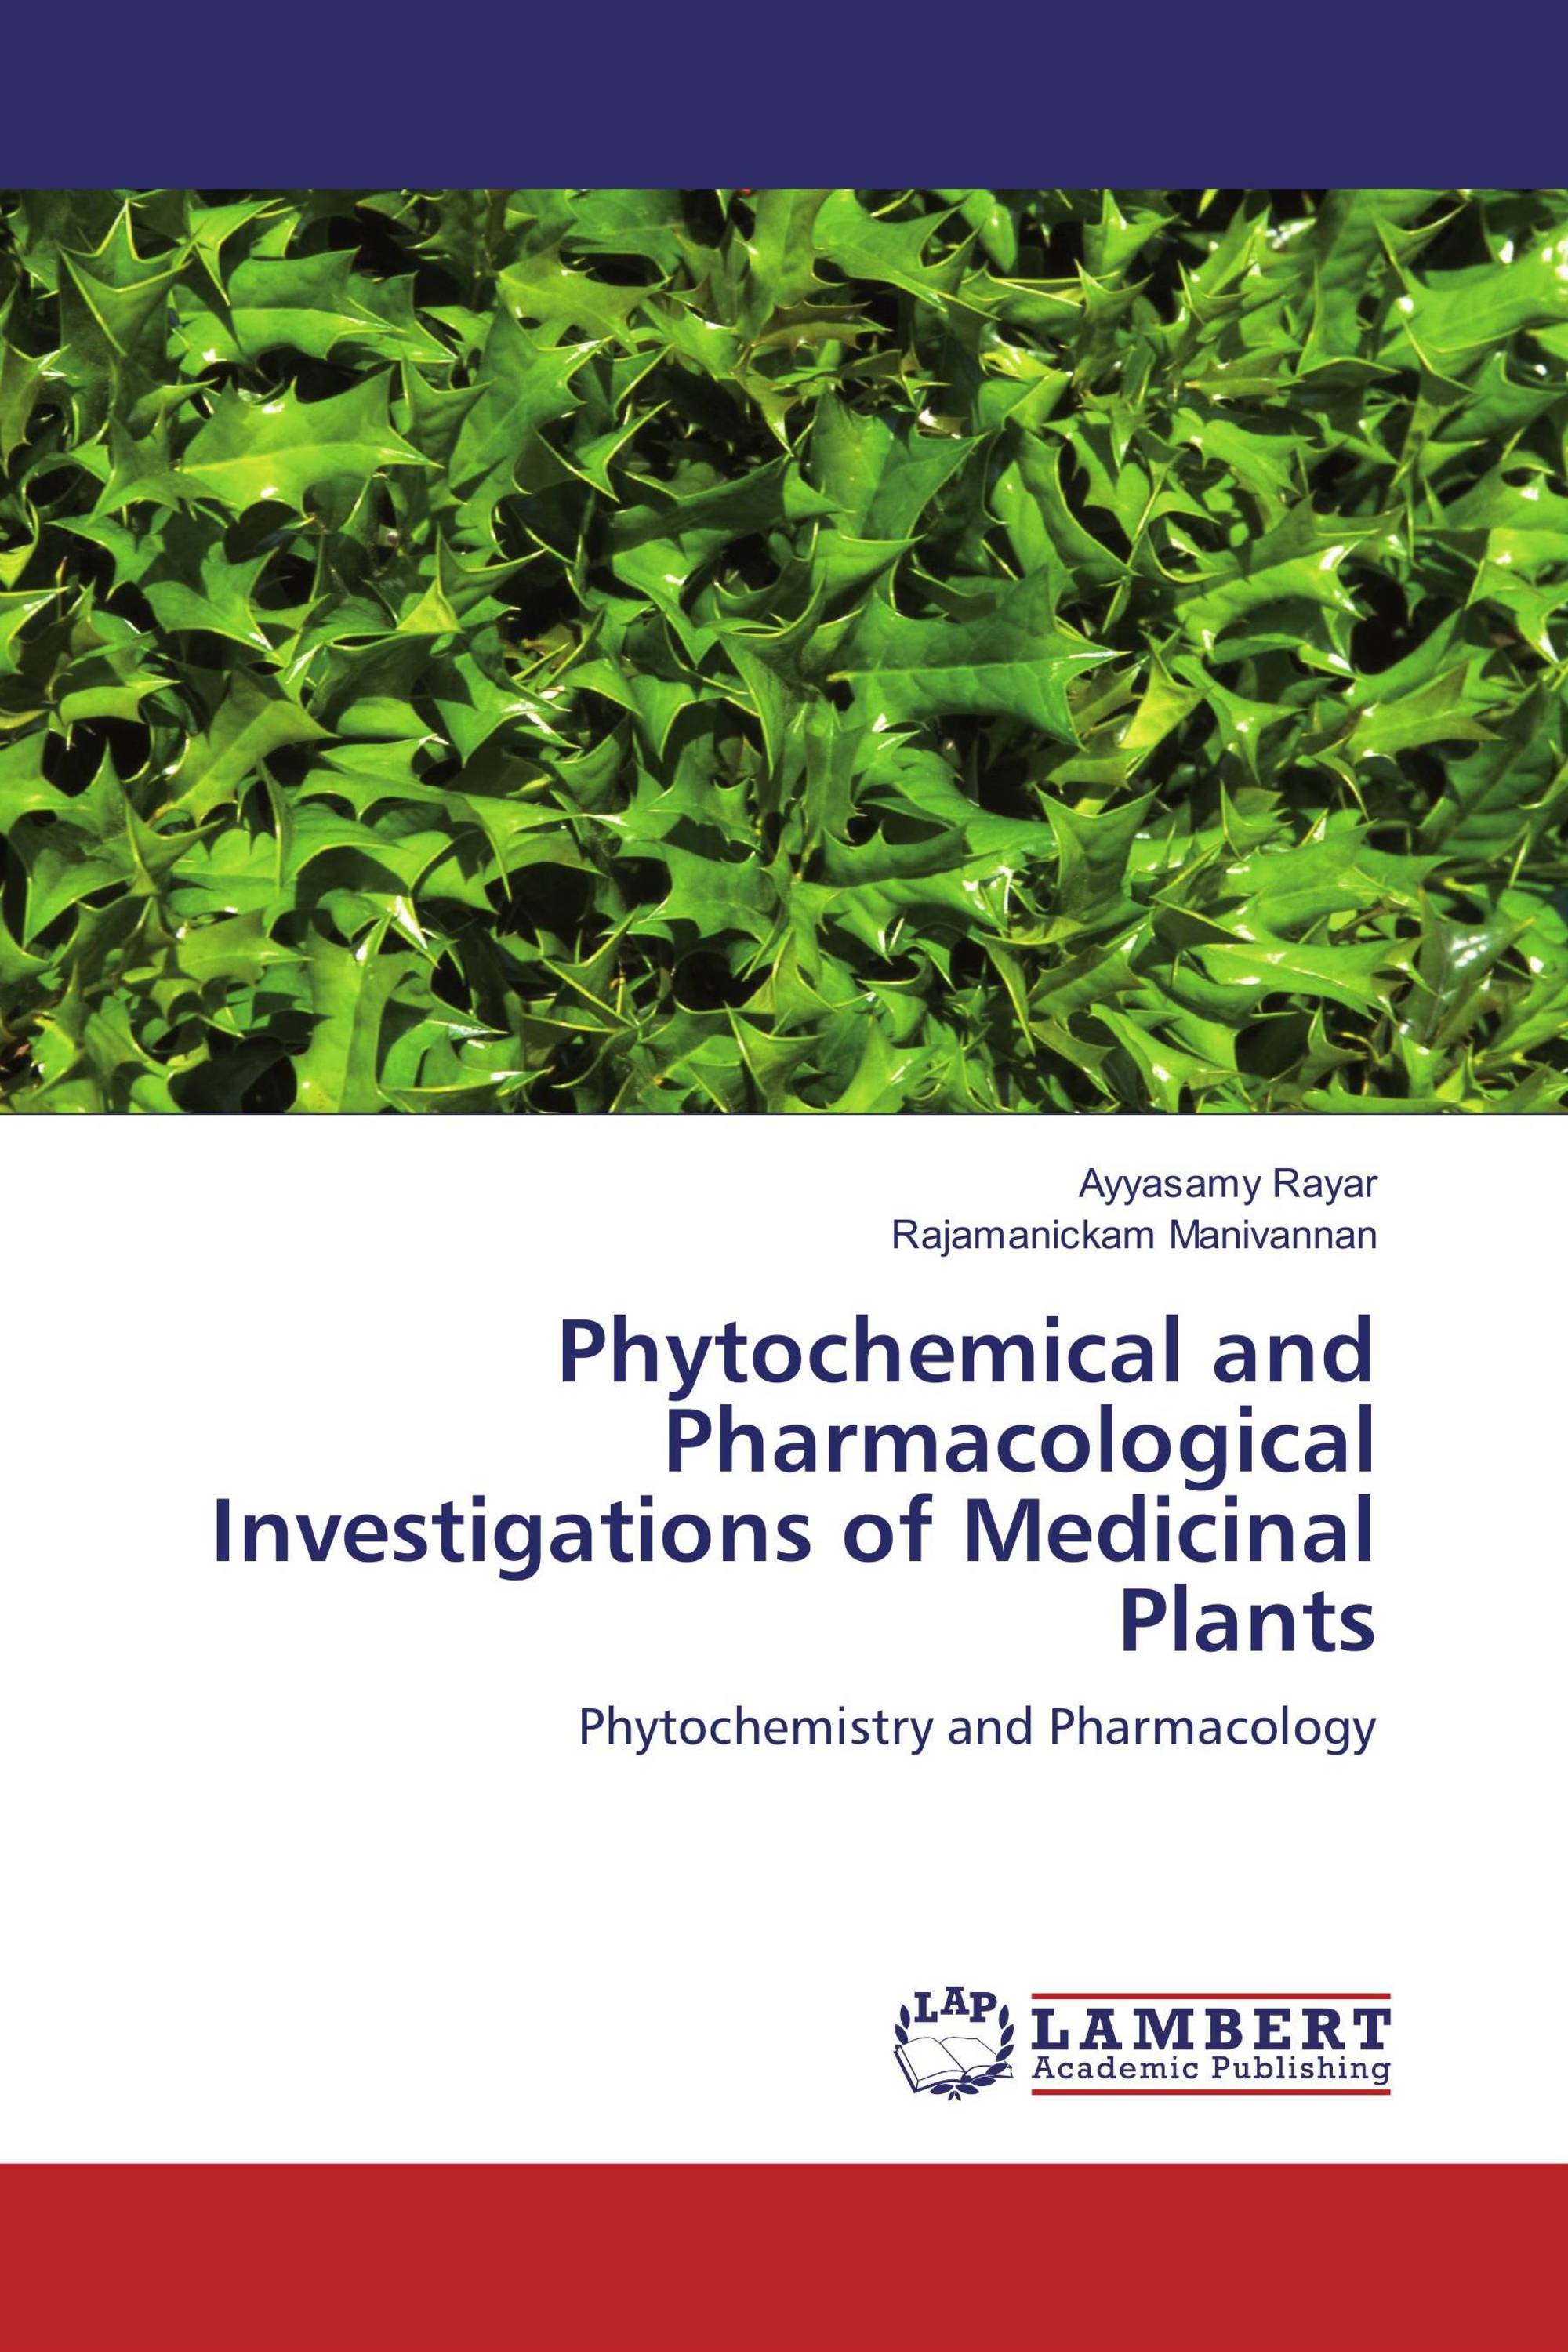 Phytochemical and Pharmacological Investigations of Medicinal Plants